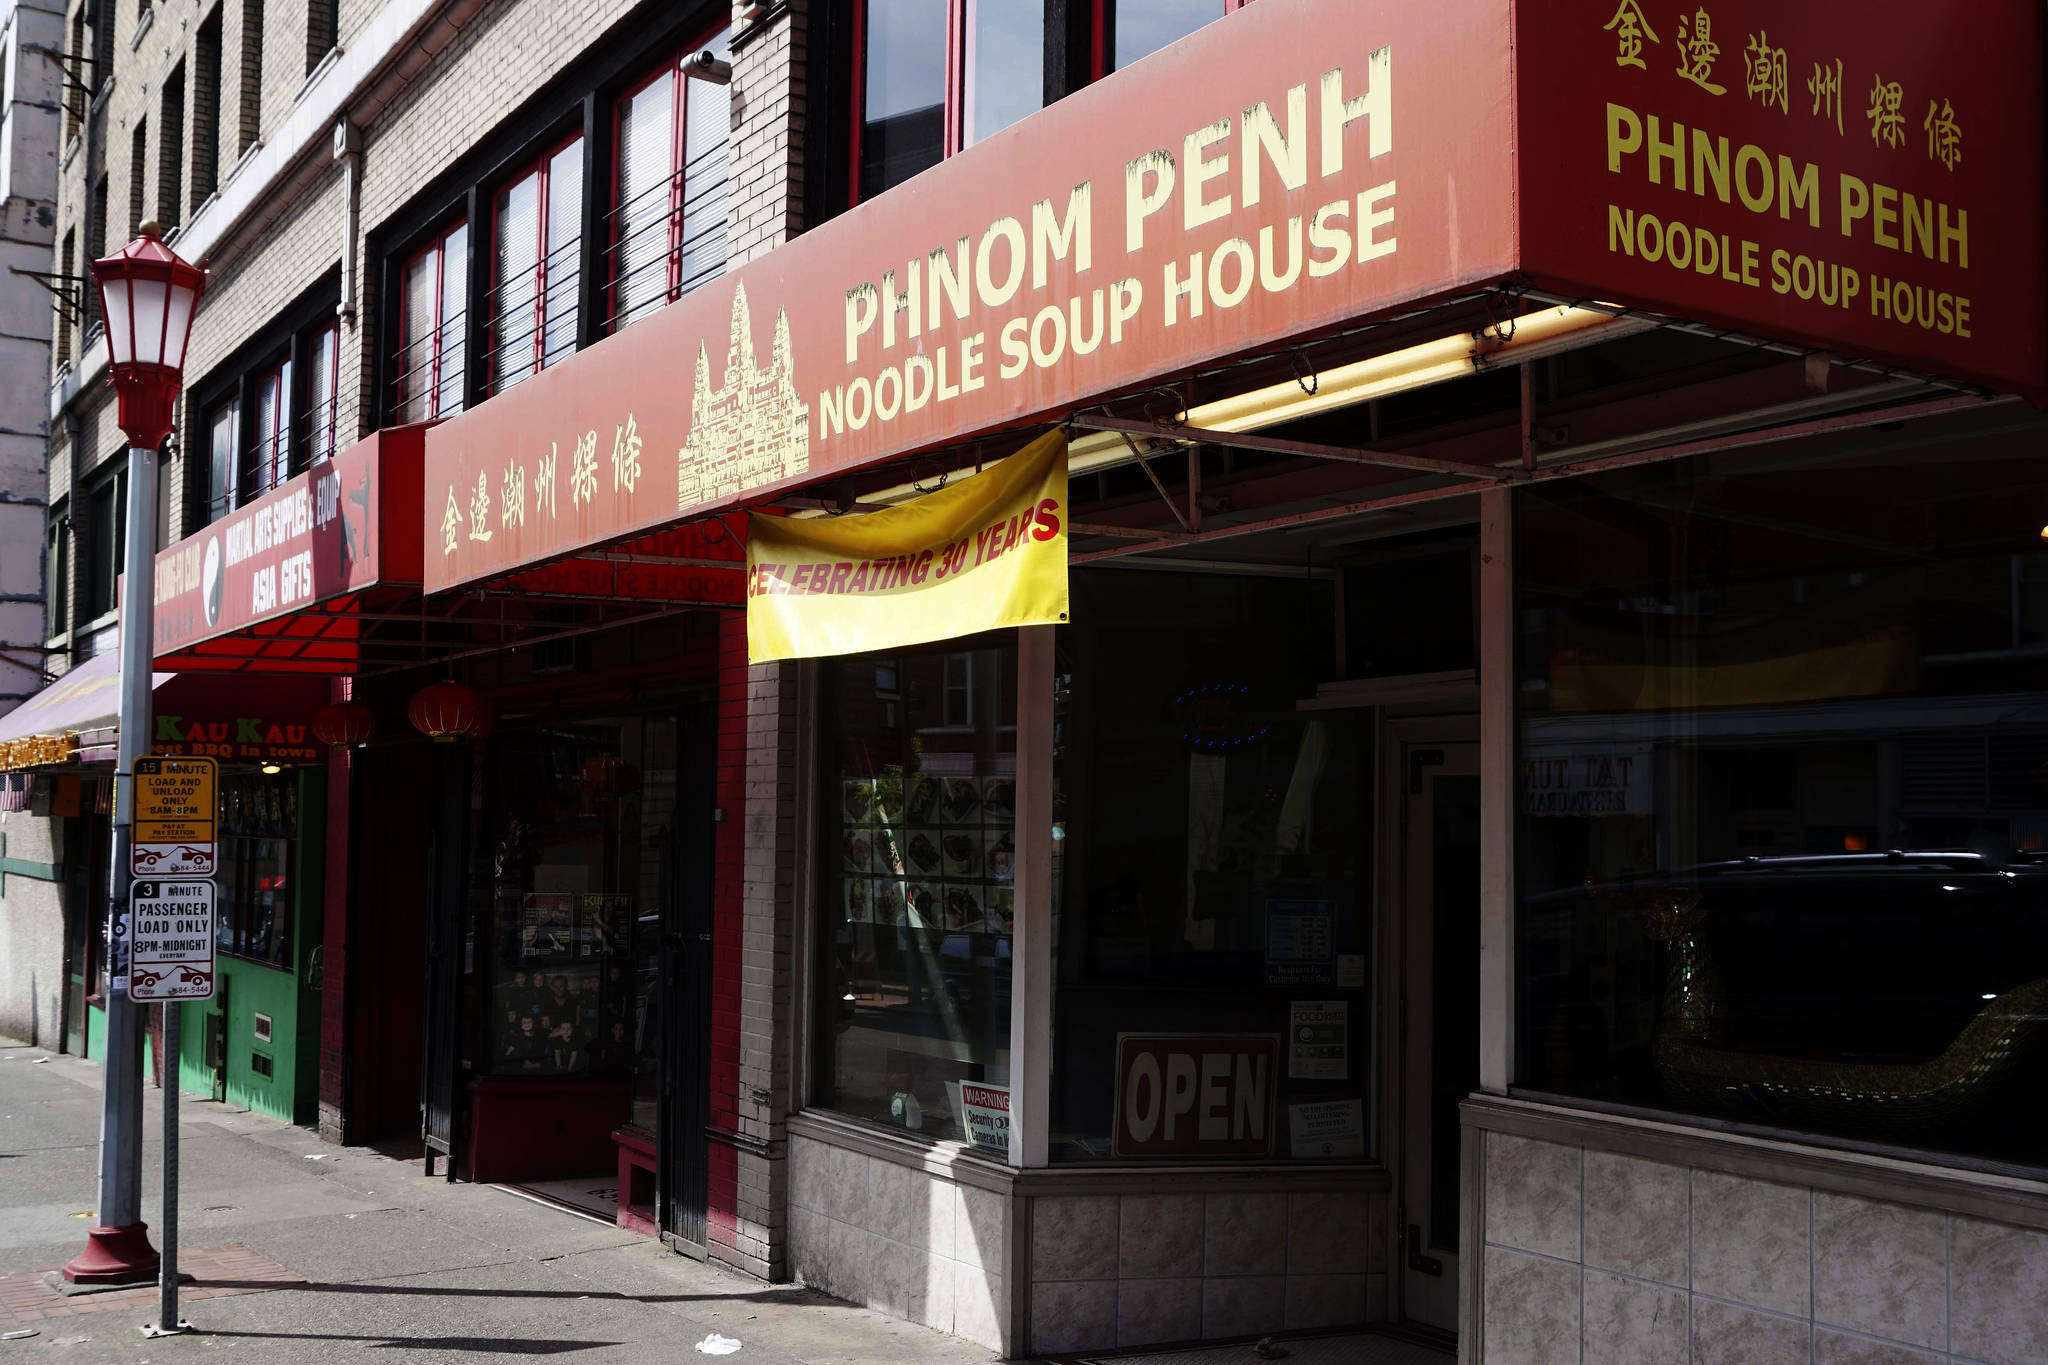 On May 28, Phnom Penh Noodle House will be closing its doors after 30 years of Cambodian cooking. Photo by Melissa Hellmann